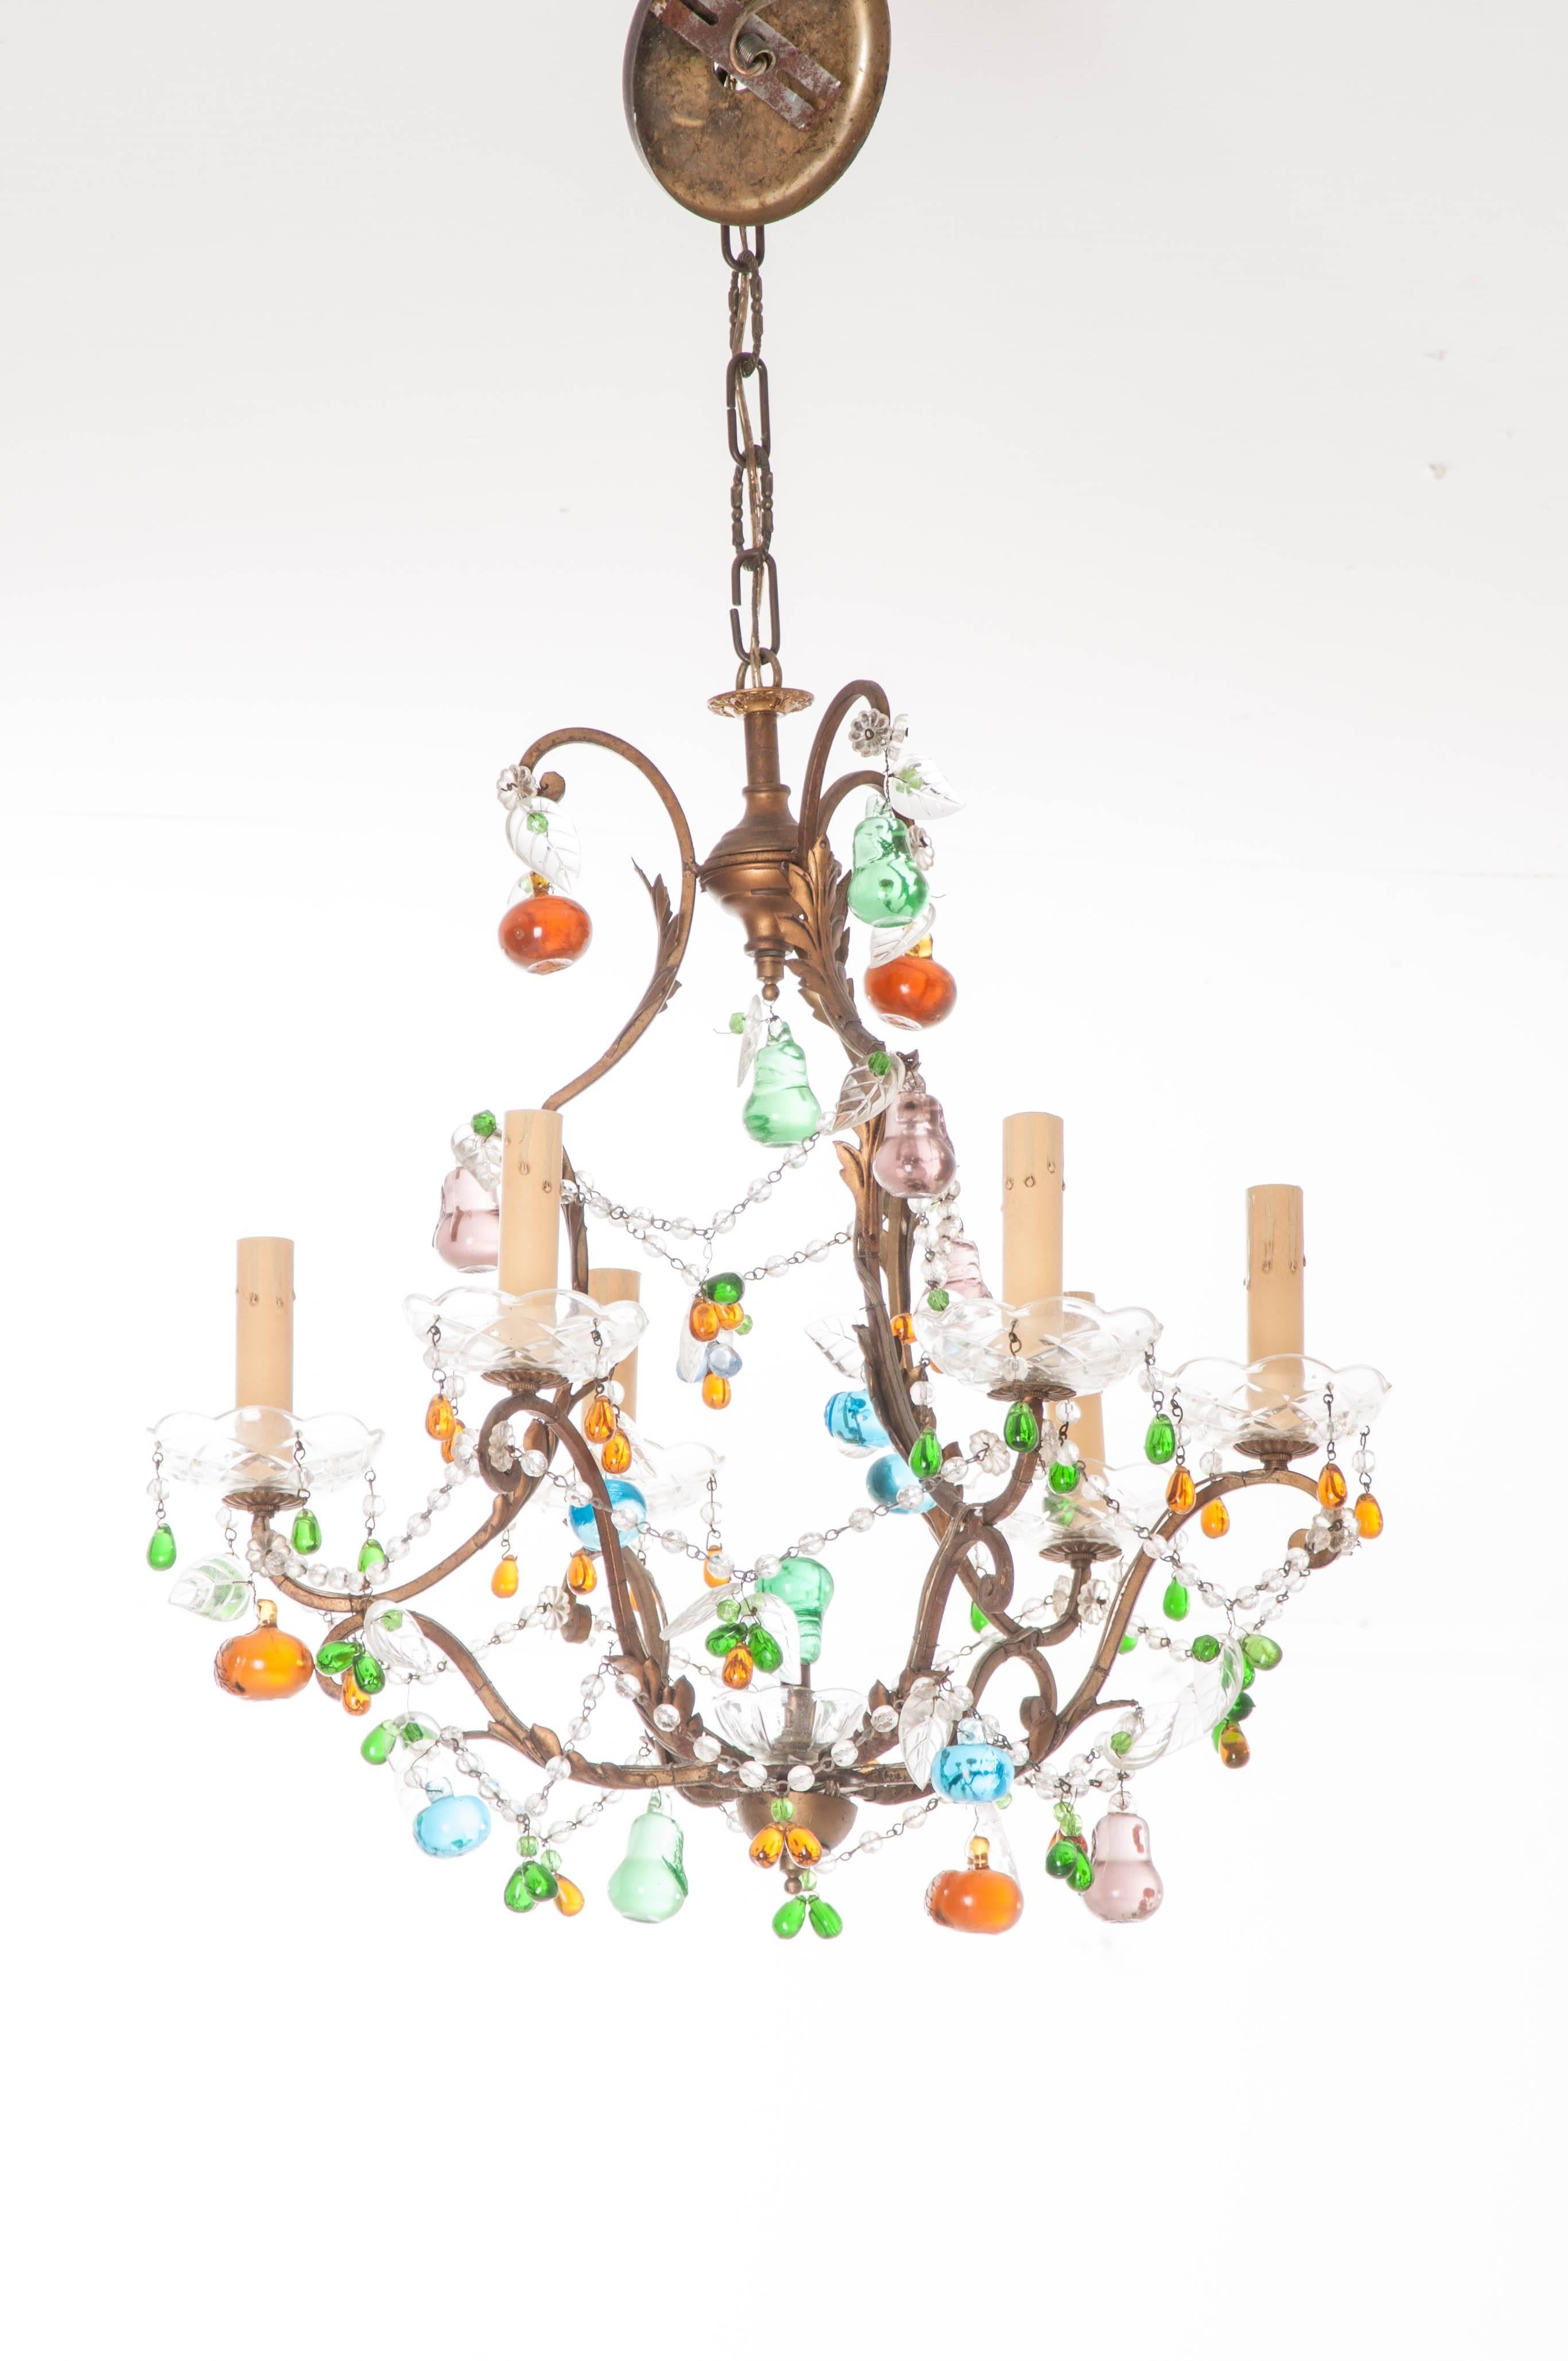 Multicolored crystal fruits and ornamentation hang from the brass birdcage frame of this playful 19th century French chandelier. Crystals in greens, blues, yellows and oranges can also be found suspended from beaded garlands that crisscross the